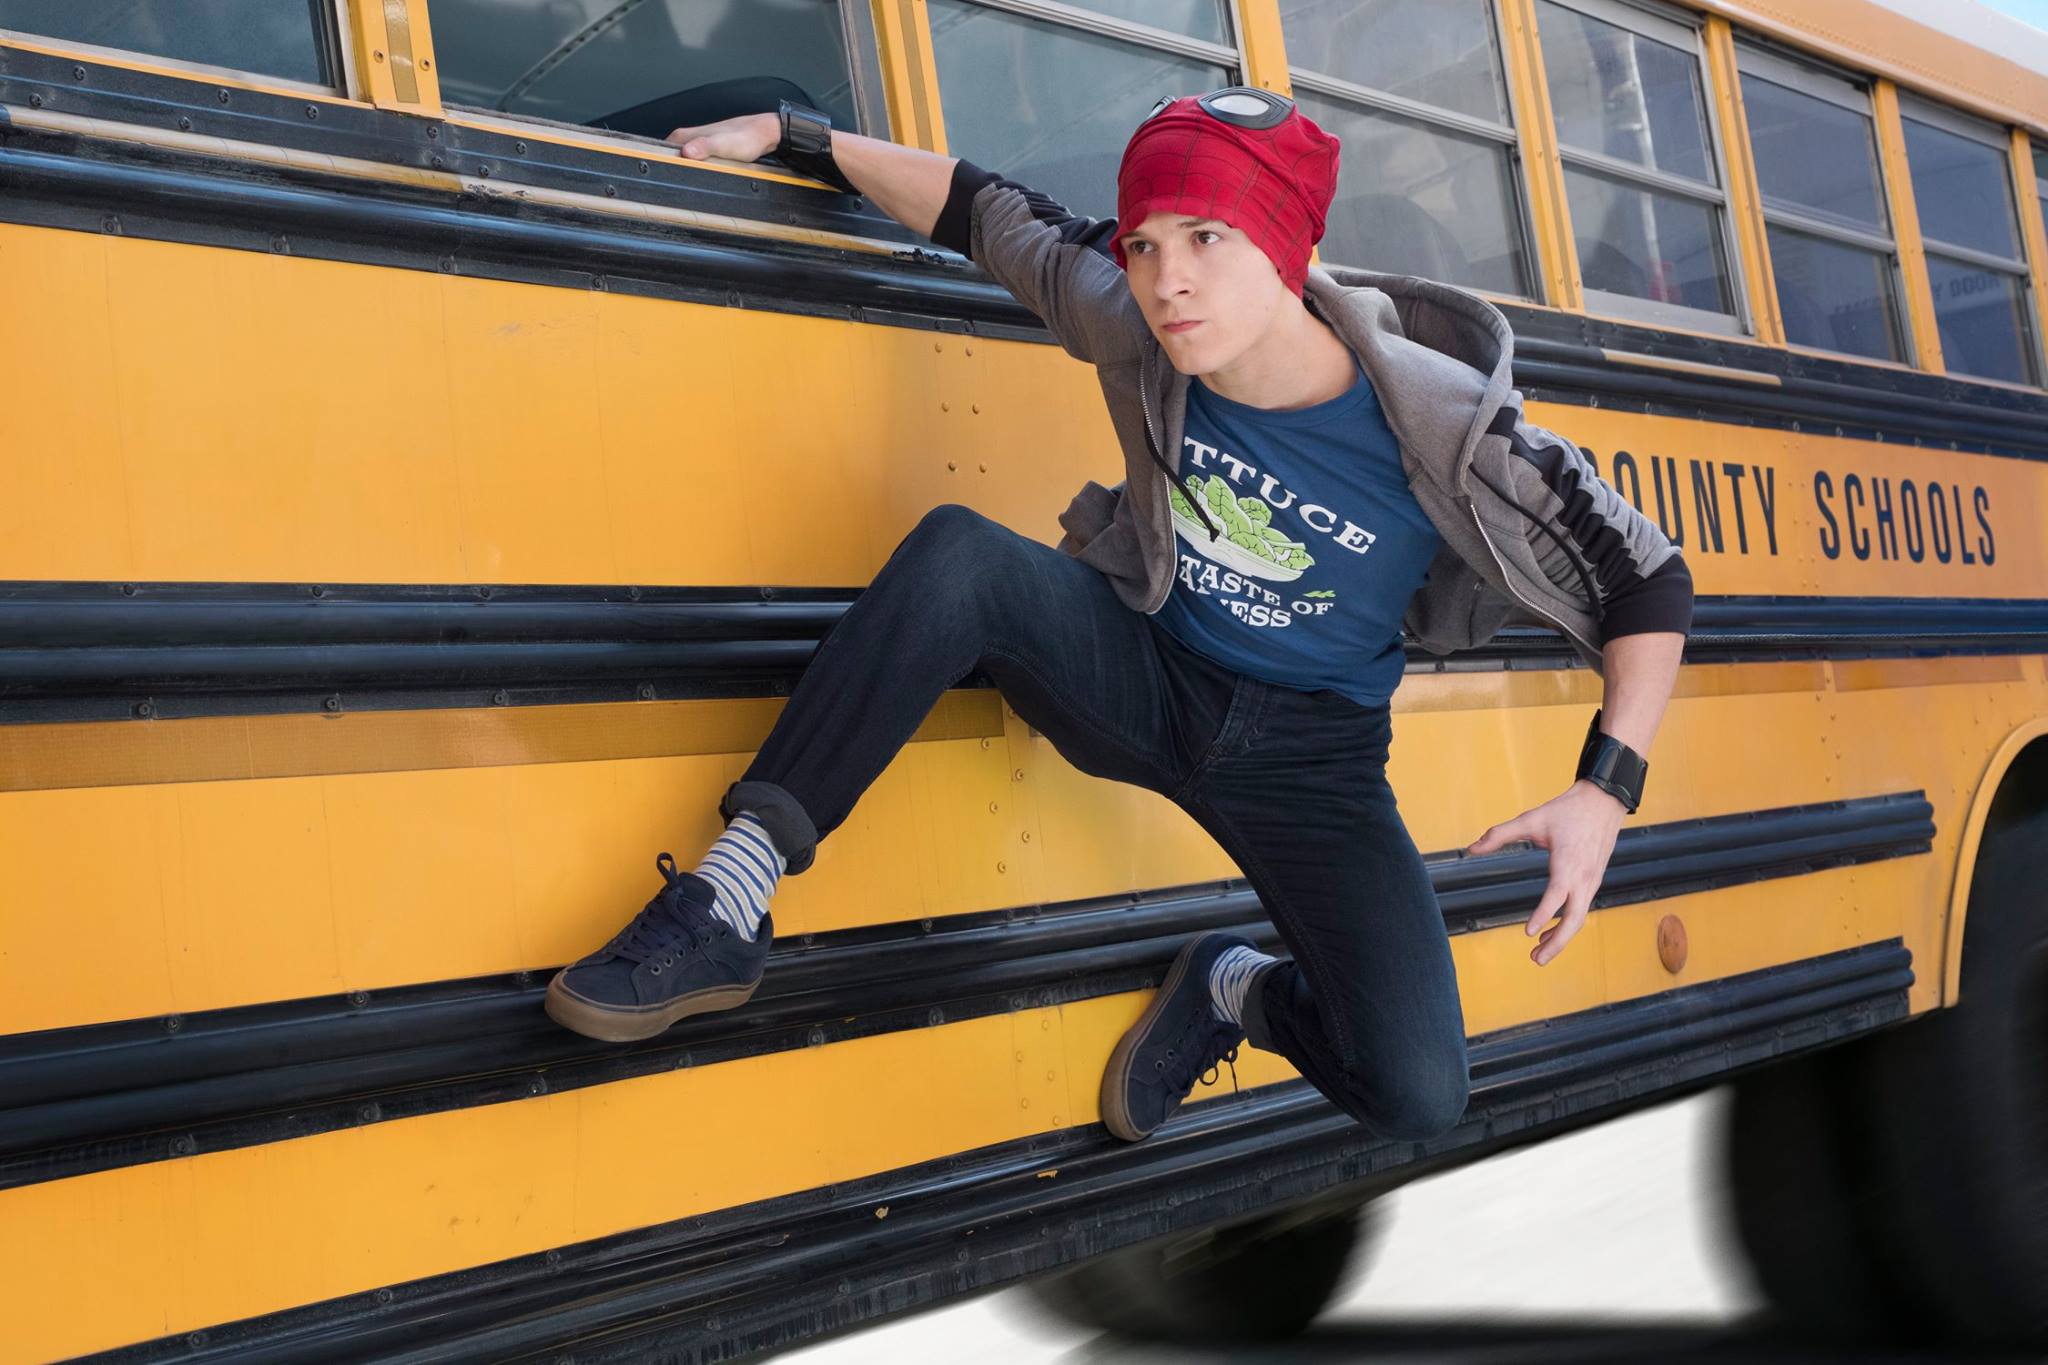 Spider Man: Far From Home Wrap Image With Tom Holland